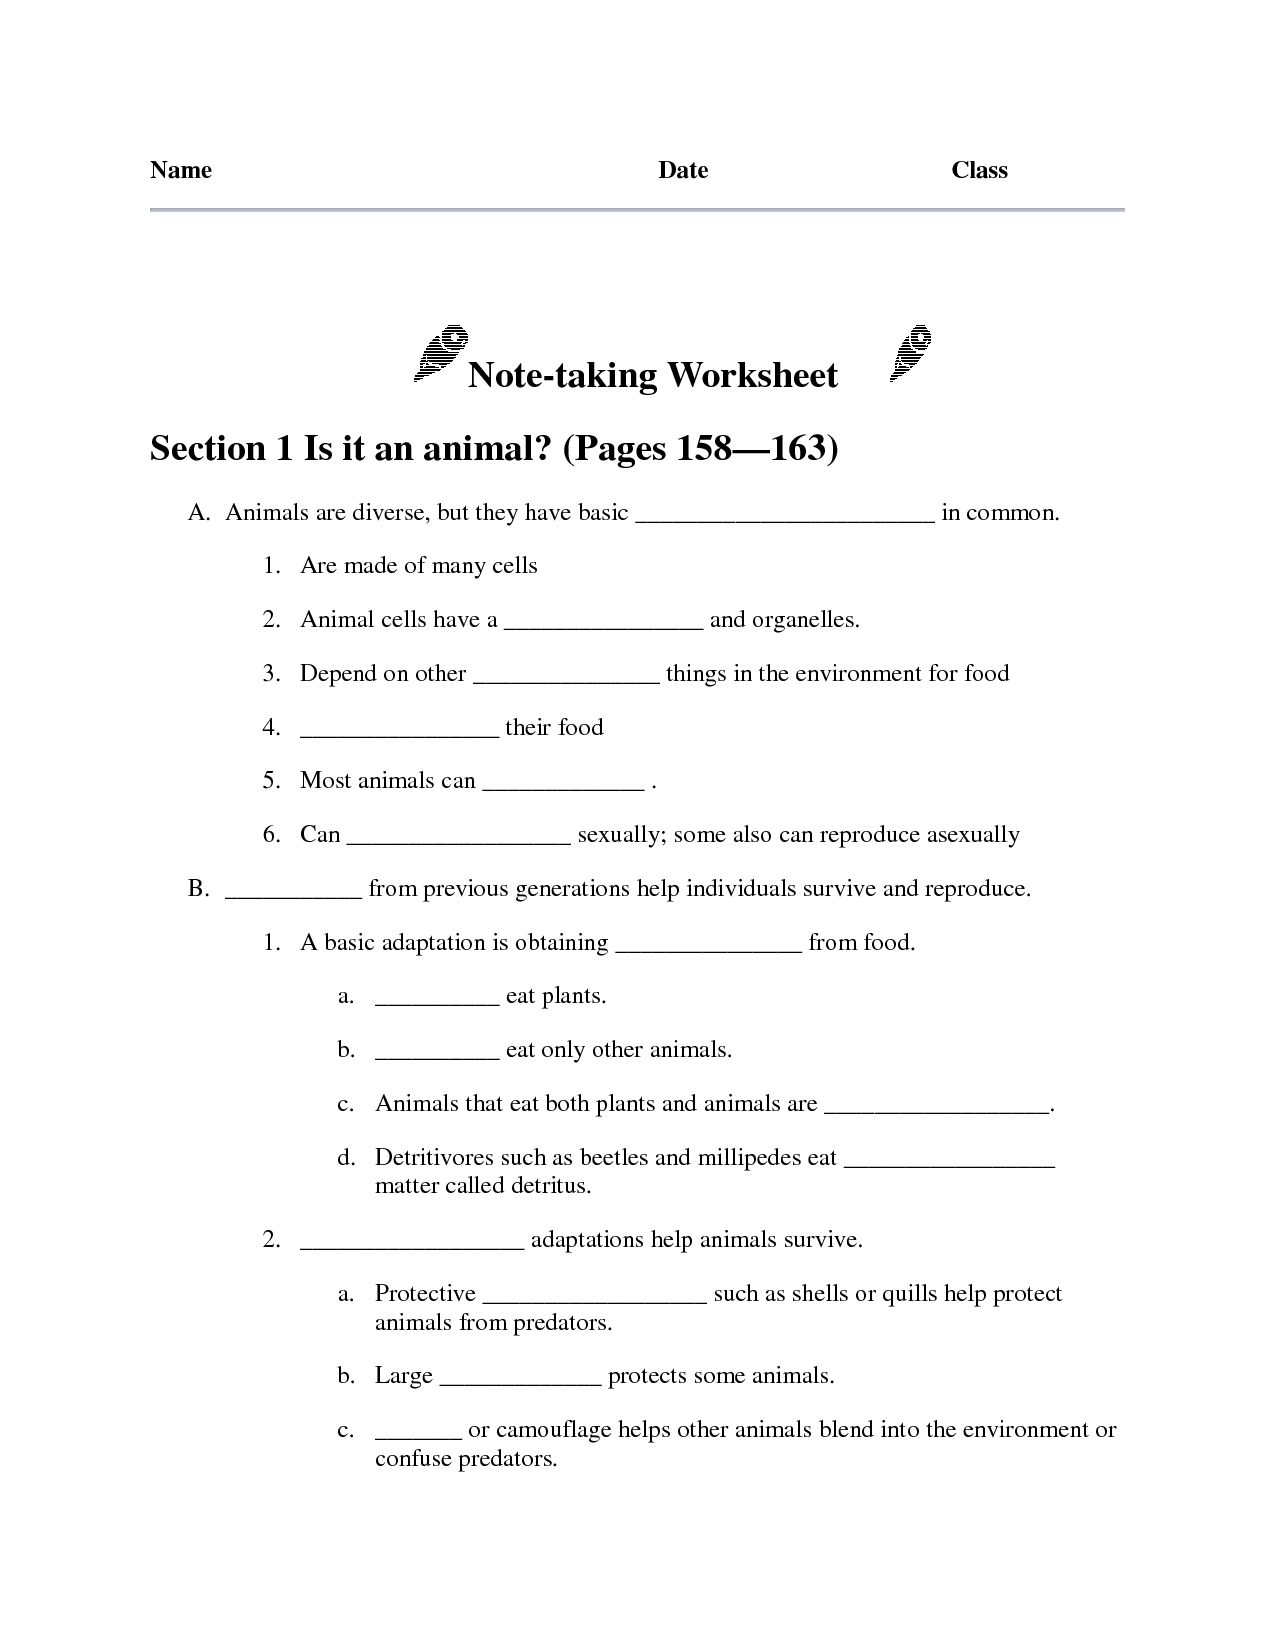 Note Taking Worksheet Section 1